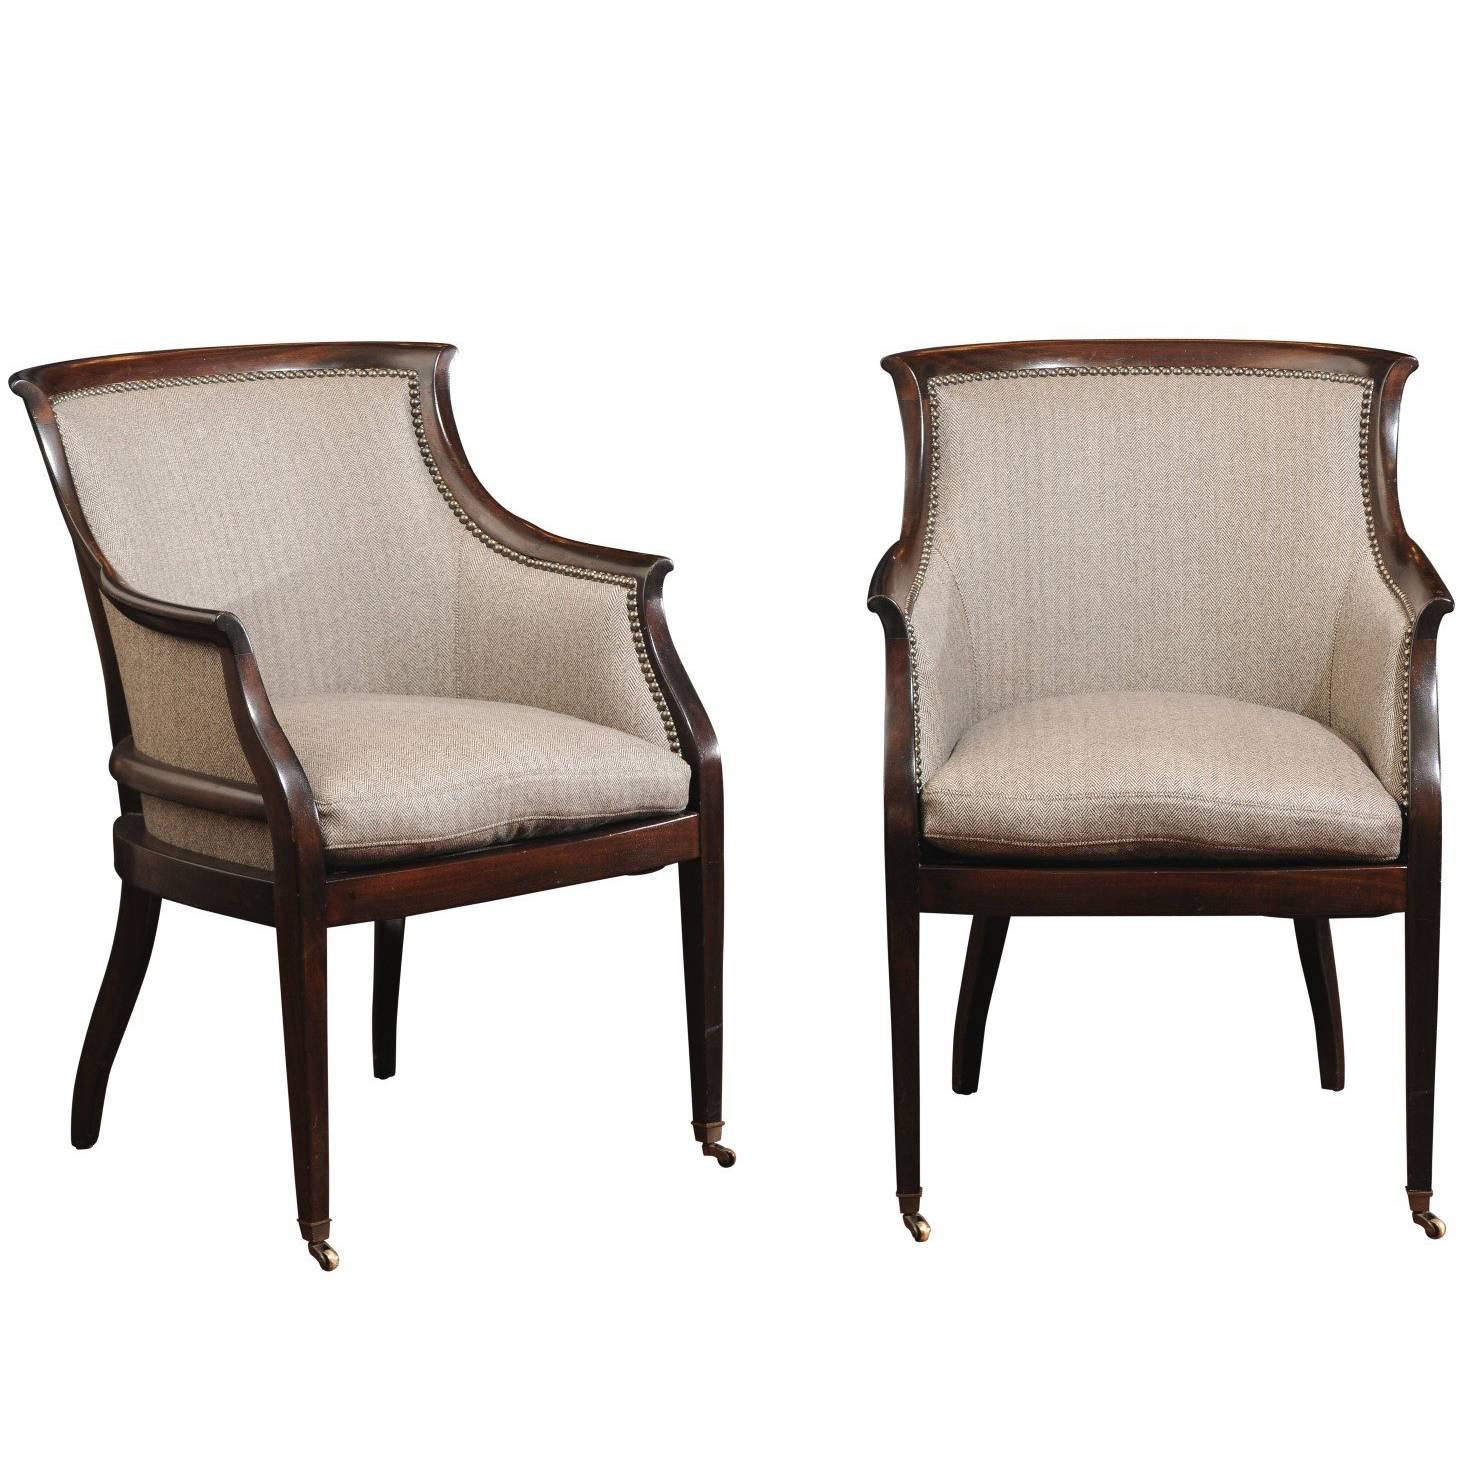 Pair of Holland & Sherry Wool and Mahogany Gondola Form Club Chairs For Sale